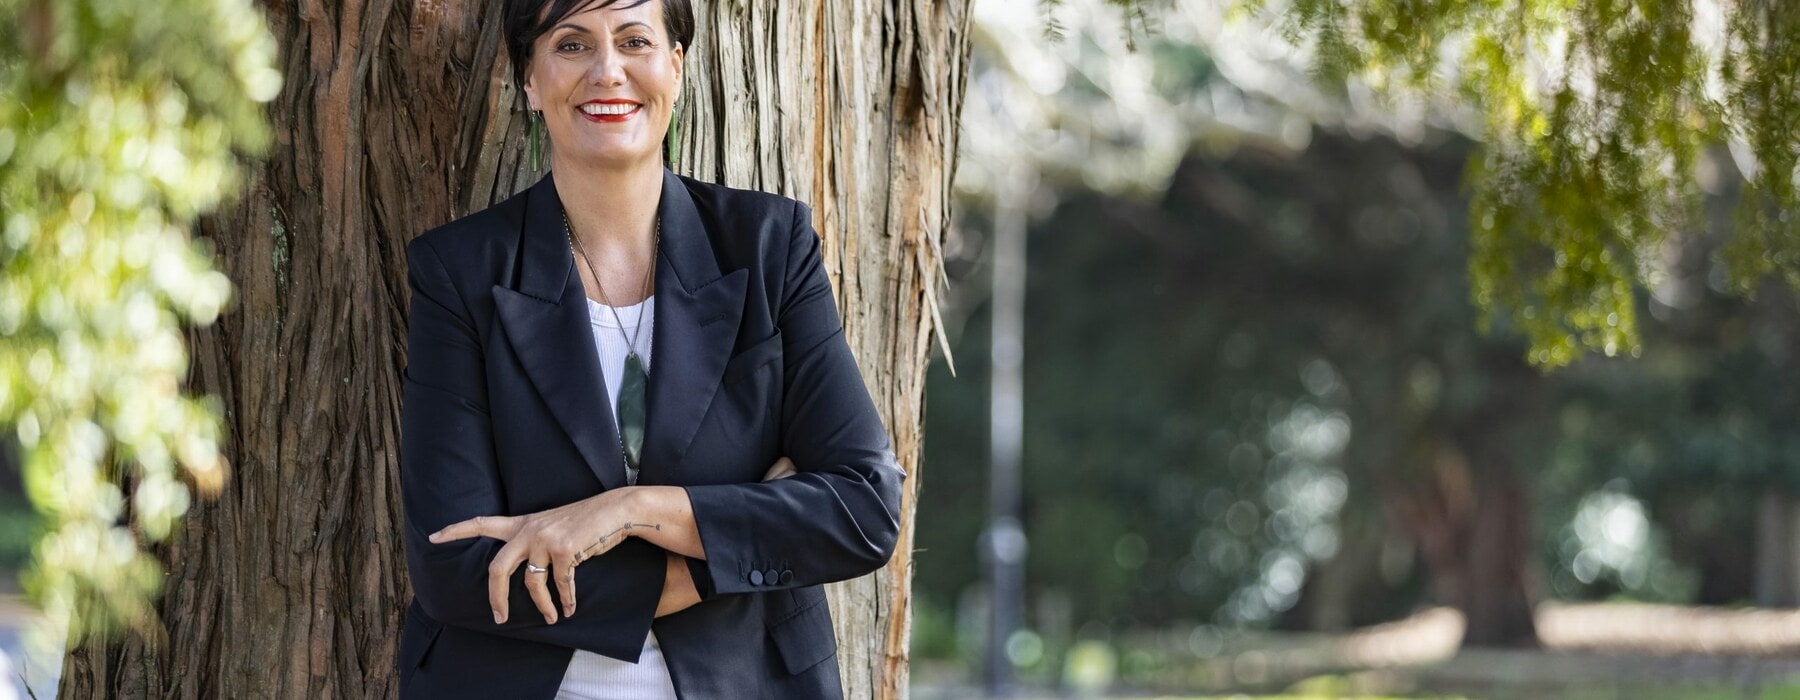 Rachel Taulelei leaning against a tree wearing a black suit and greenstone necklace